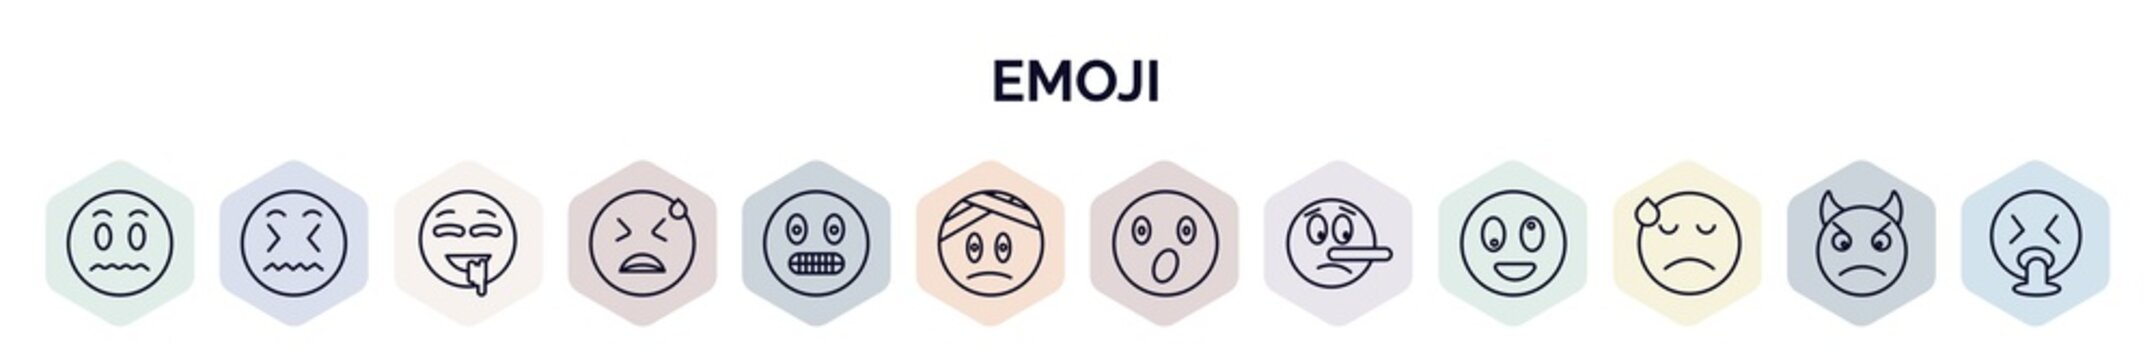 set of emoji web icons in outline style. thin line icons such as silent emoji, disgusted emoji, drool desperate nervous injured surprised lying dissapointment icon.